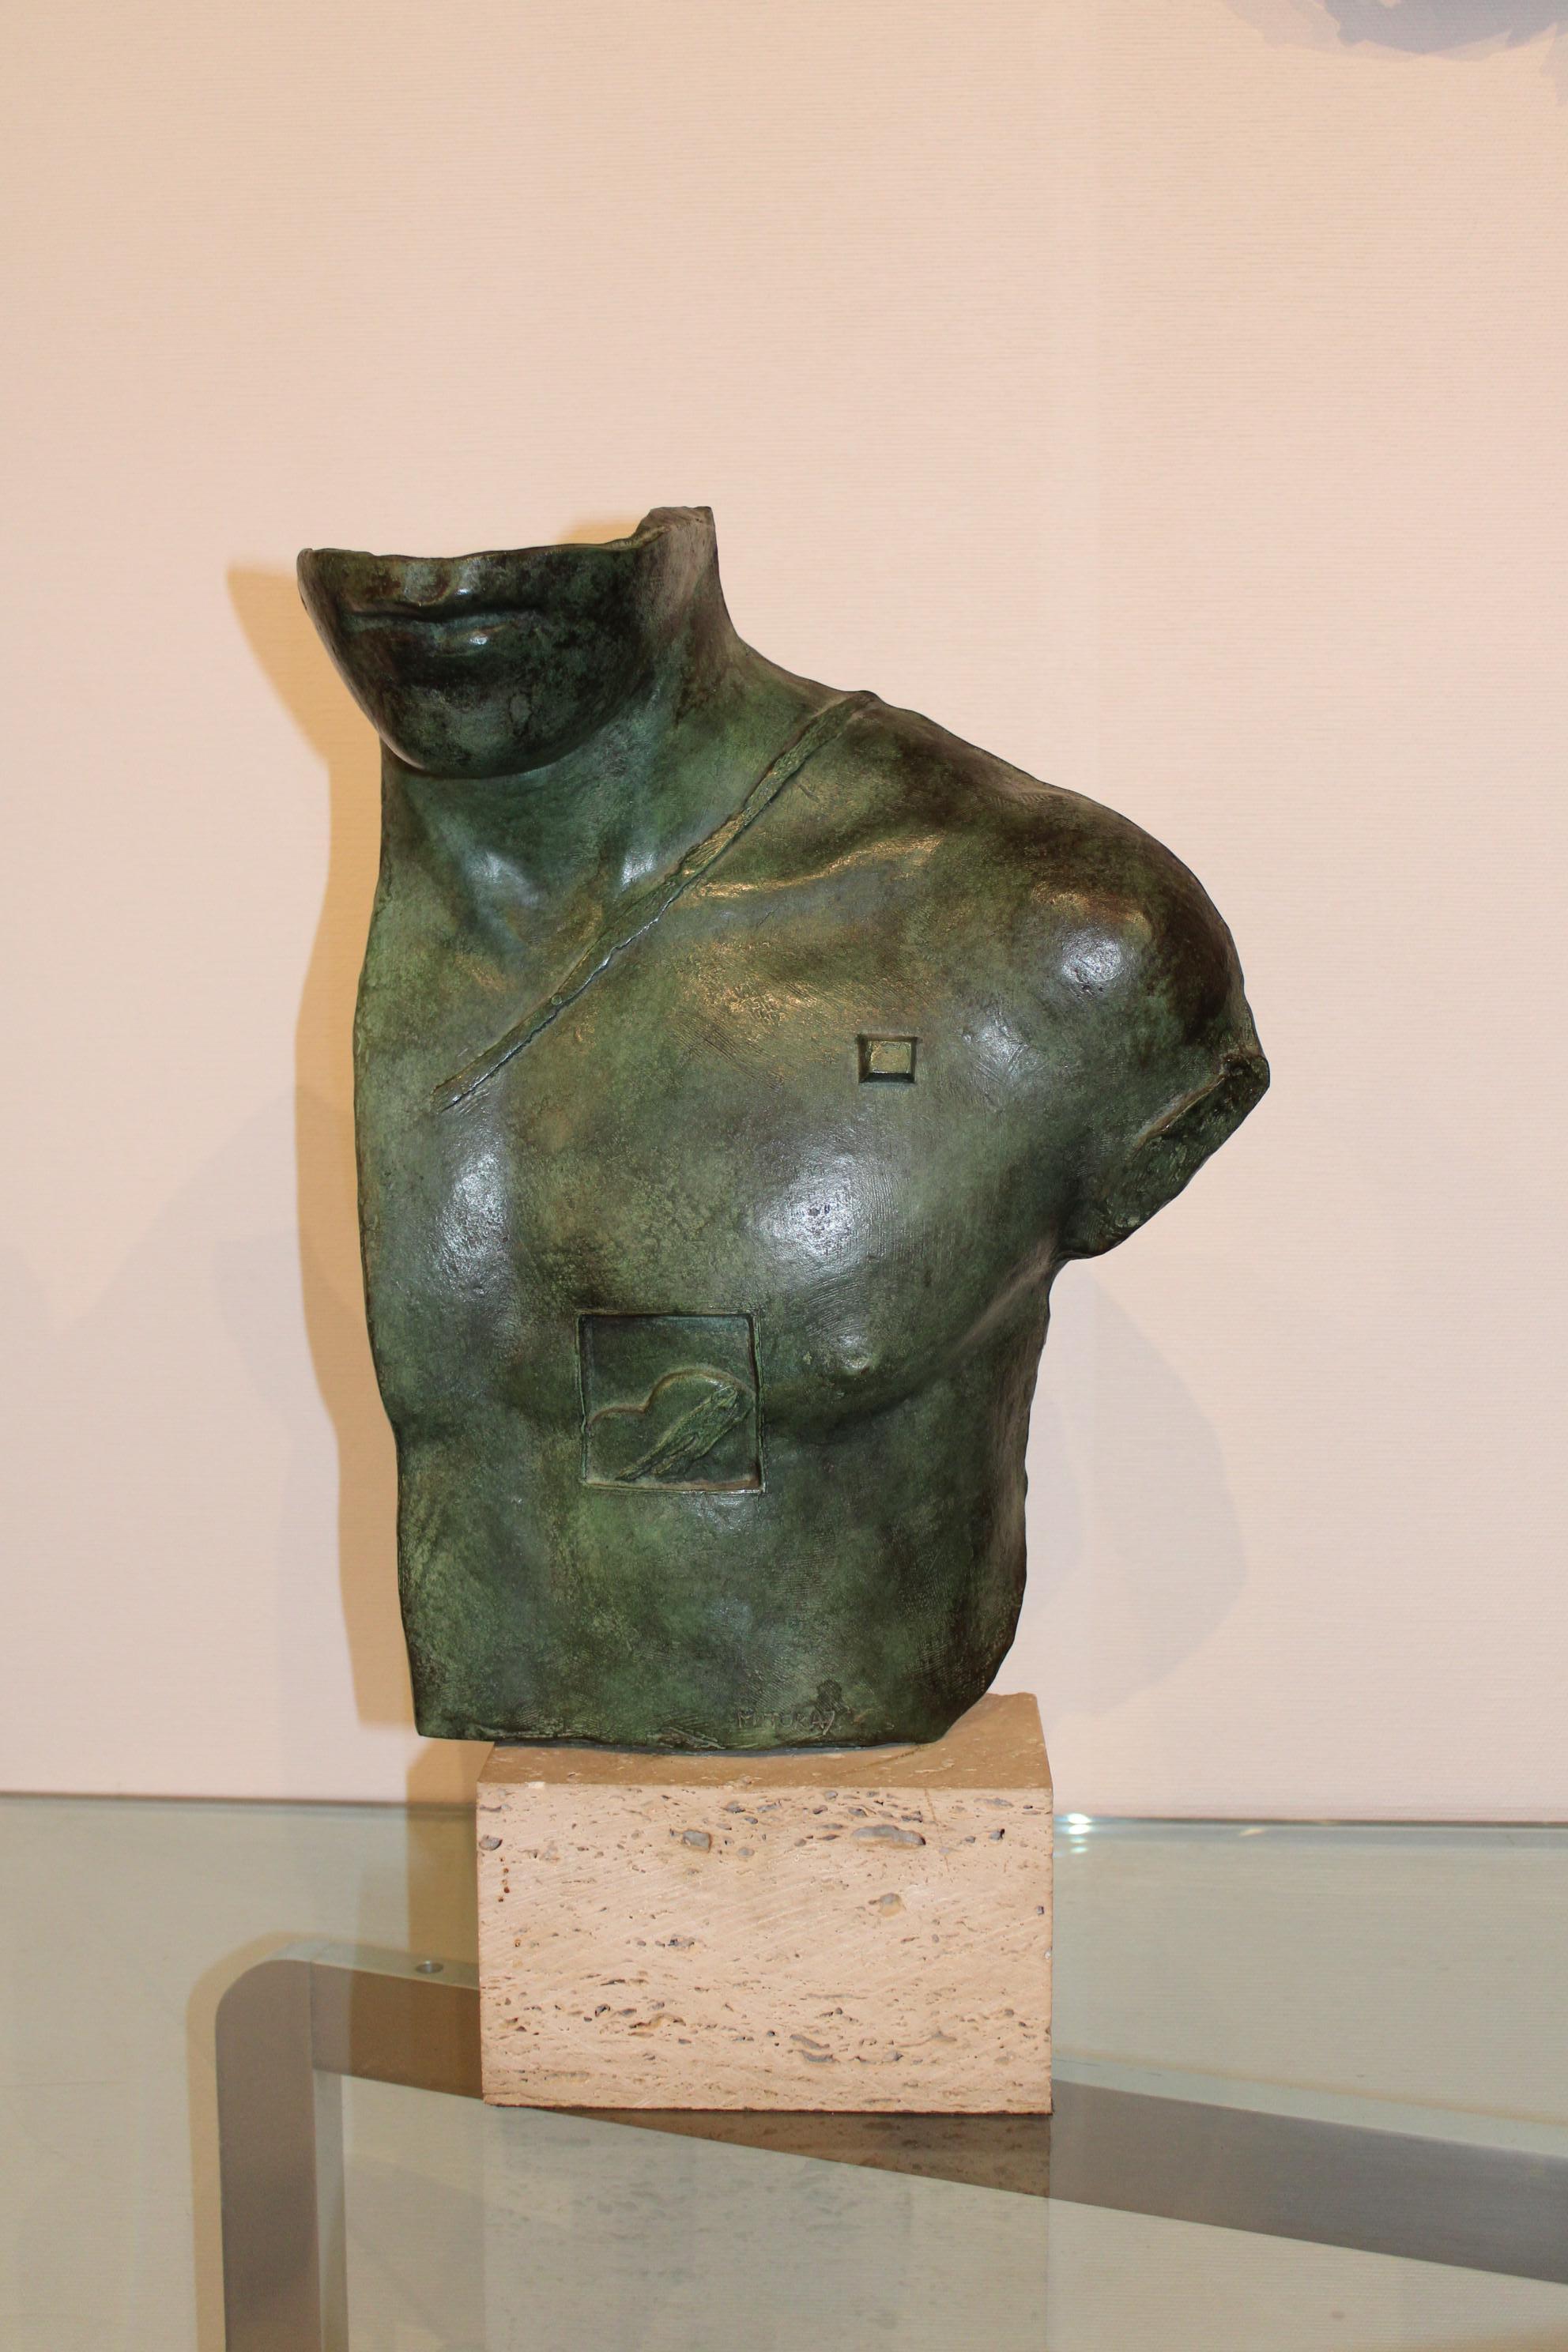 Sculpture by Igor Mitoraj (1944 - 2014)
Asclepios, from 1988
Bronze with green patina, travertine socle

Signed Mitoraj and numeroted HC. 2/1000

